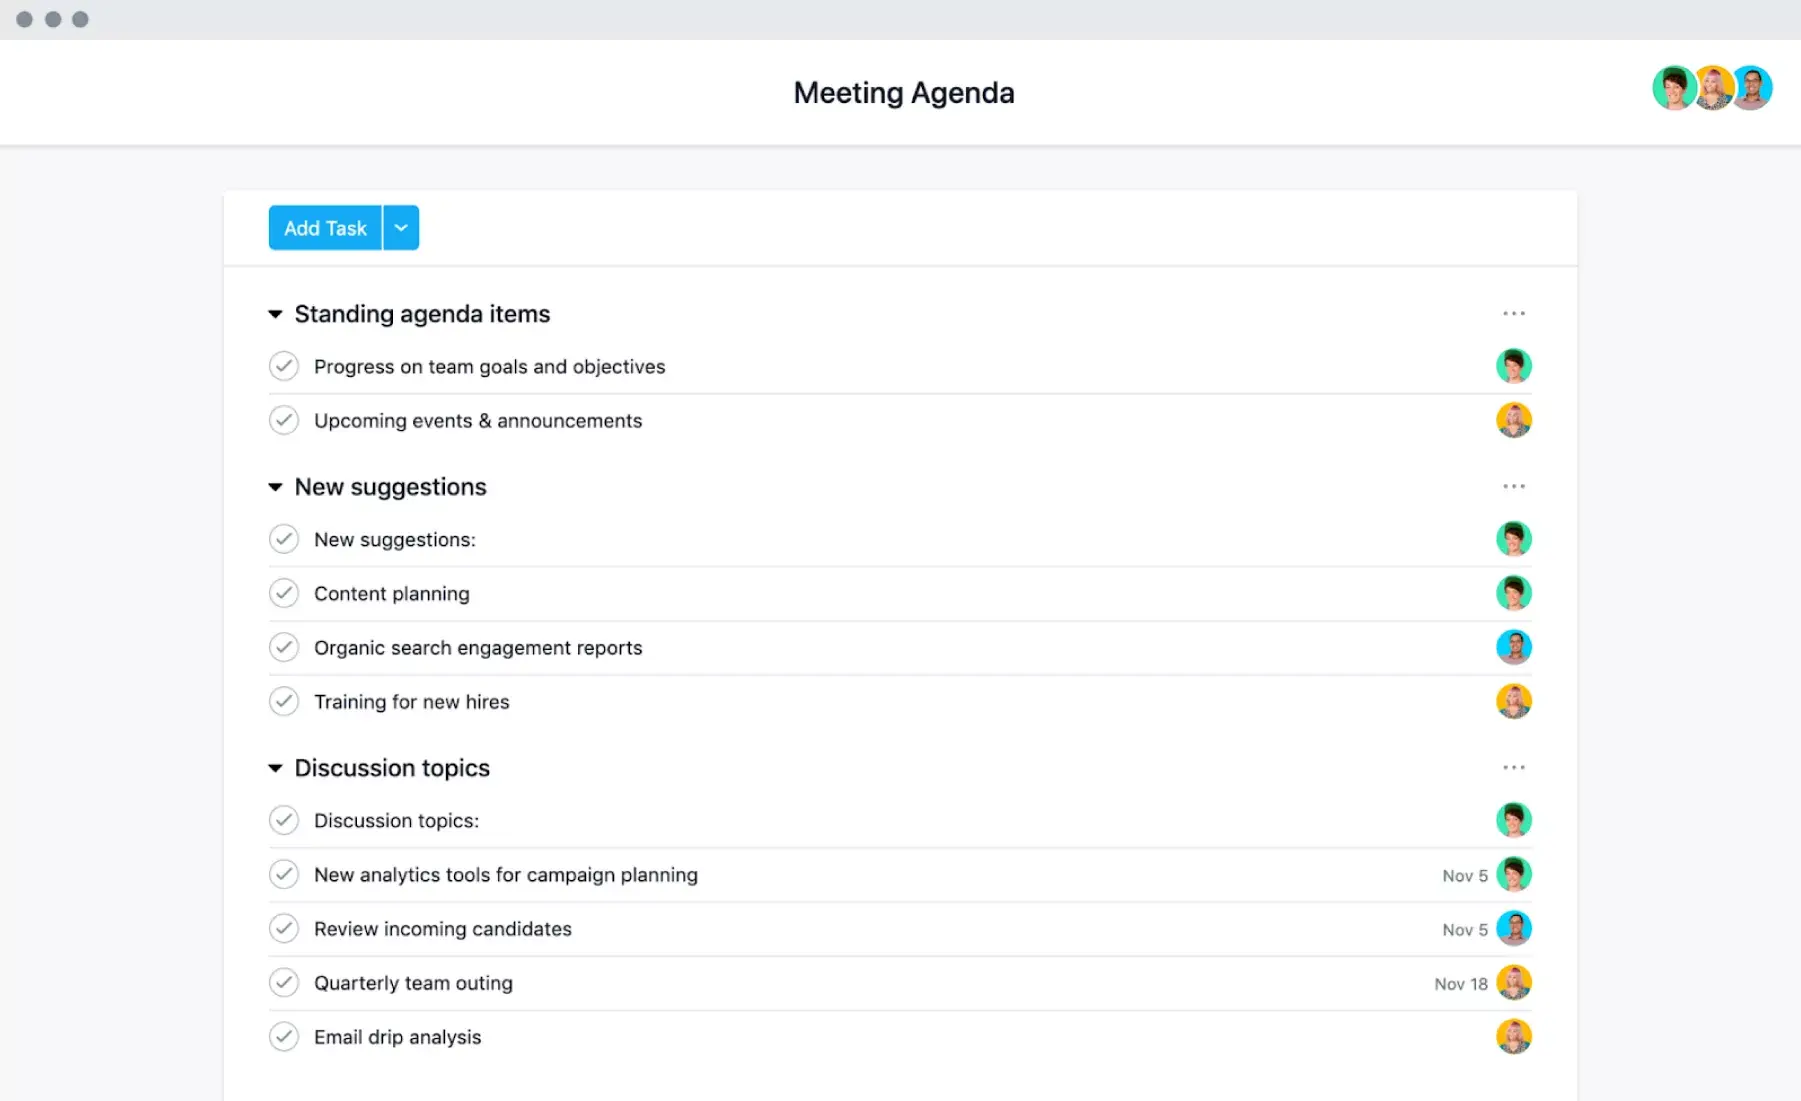 [List view] Meeting agenda template in Asana, spreadsheet-style view